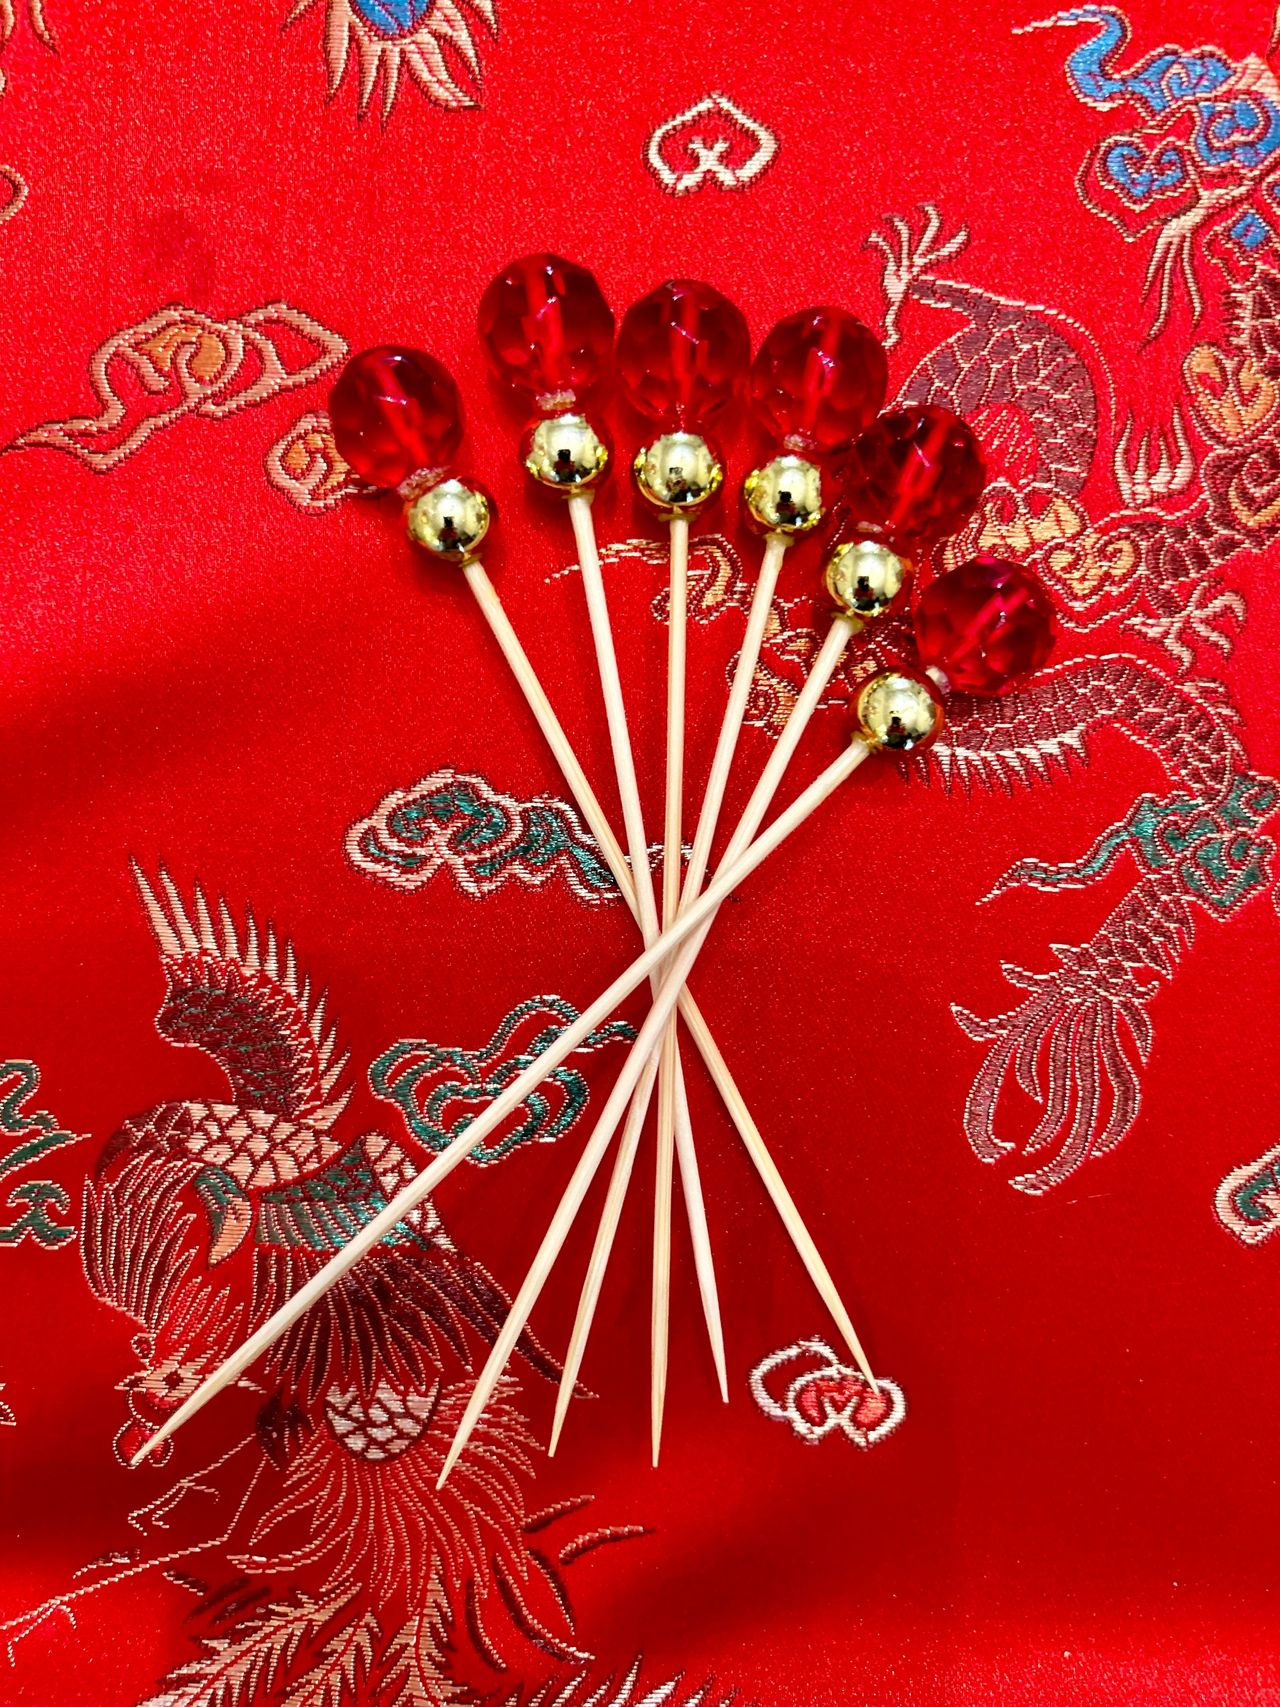 Red and gold cocktail picks on red background.